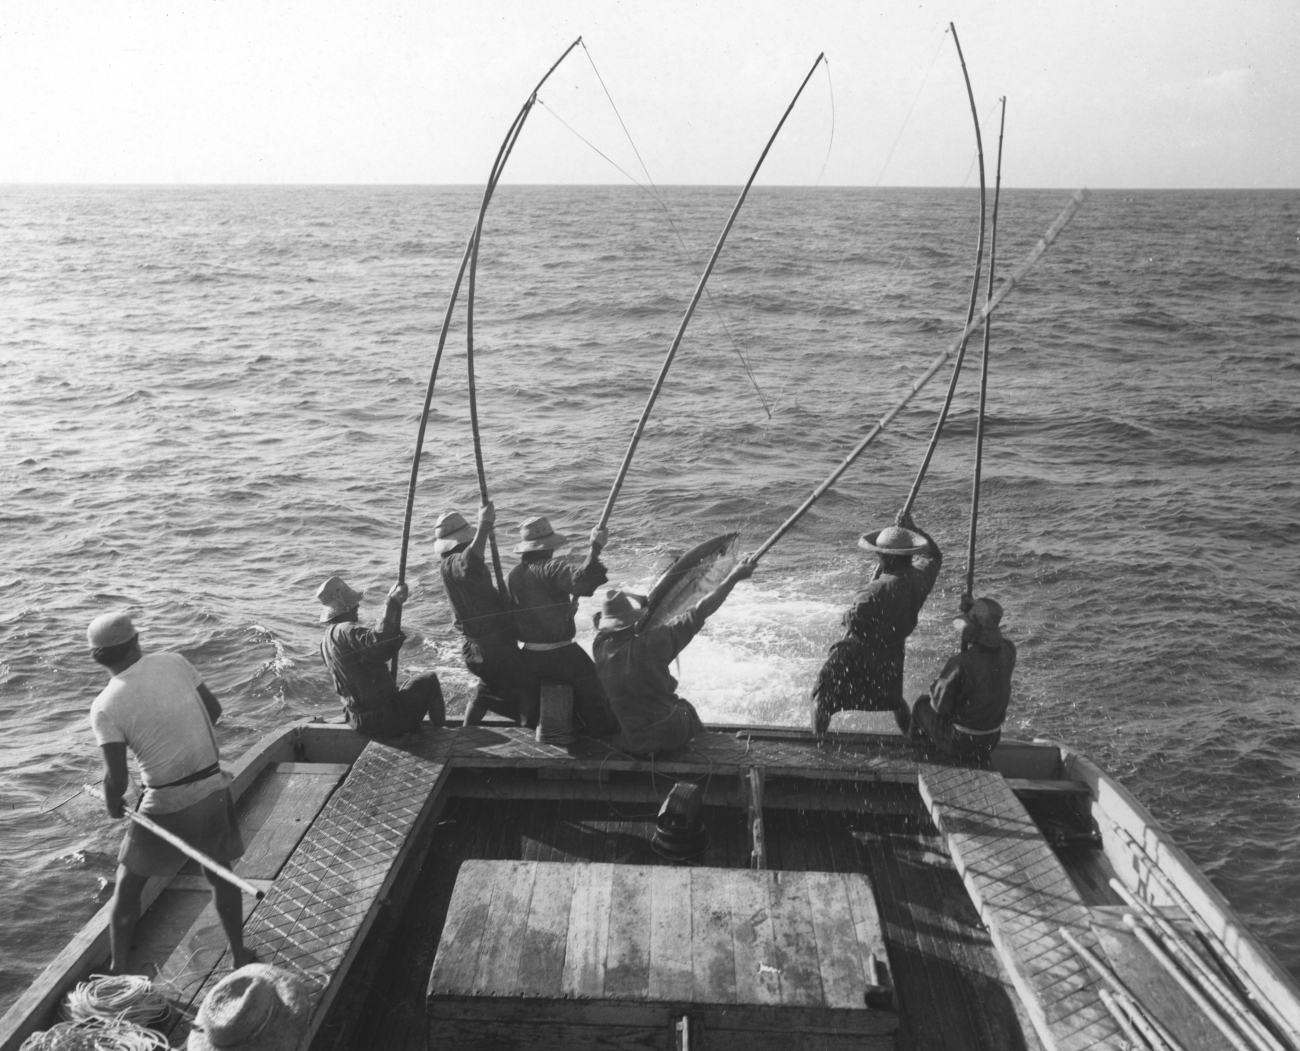 Fishing for tuna in Central Pacific Ocean near Hawaii